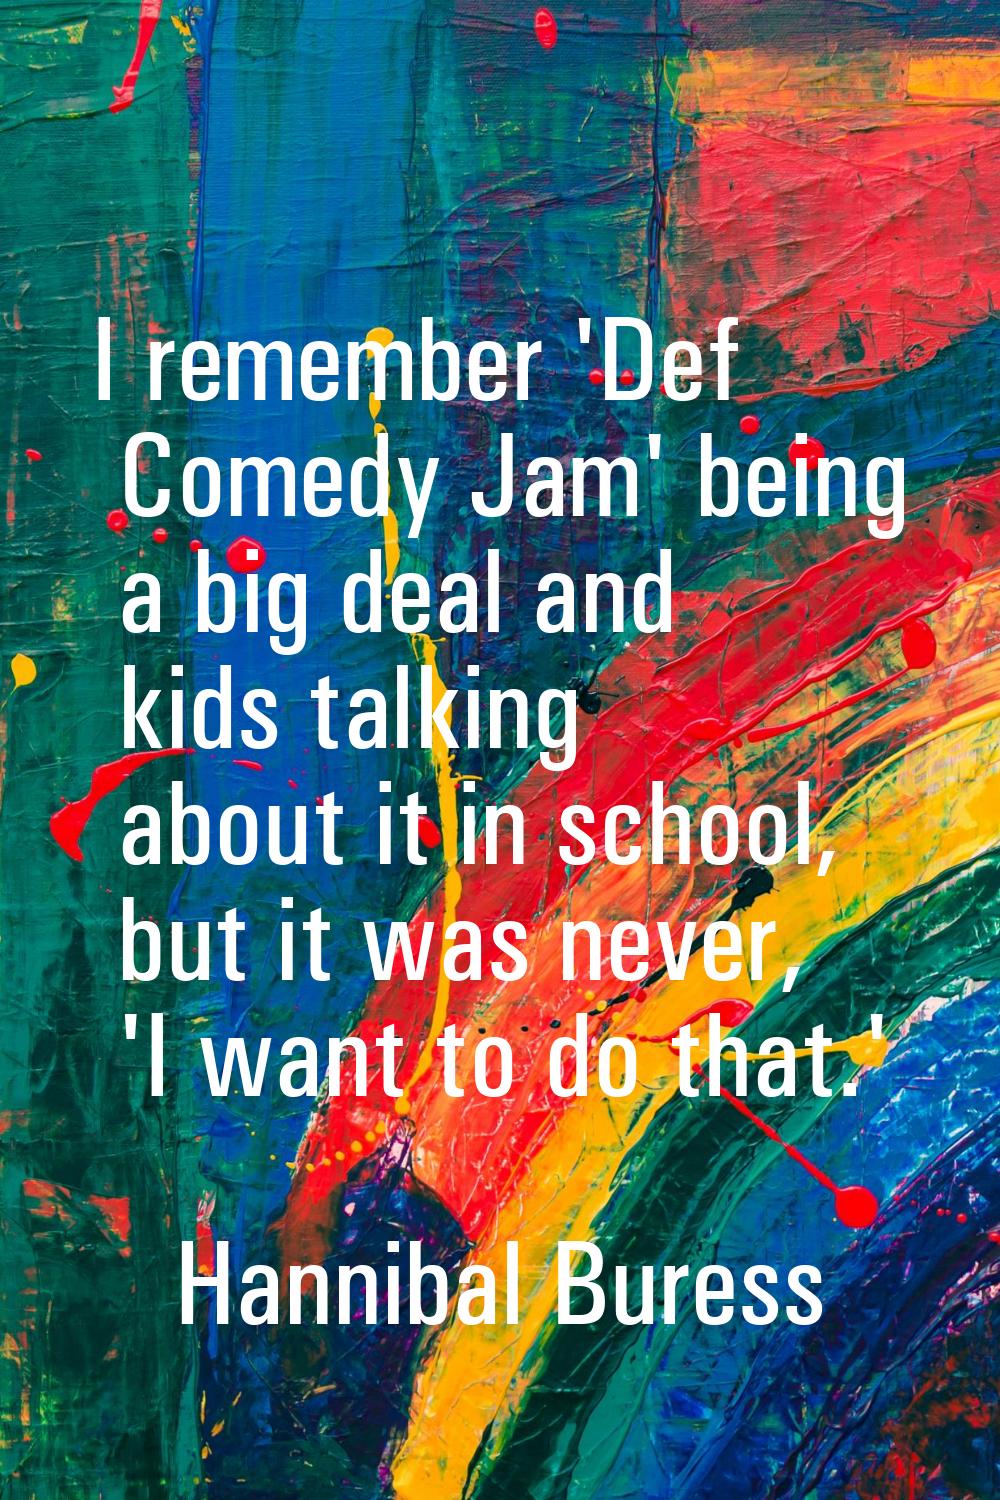 I remember 'Def Comedy Jam' being a big deal and kids talking about it in school, but it was never,